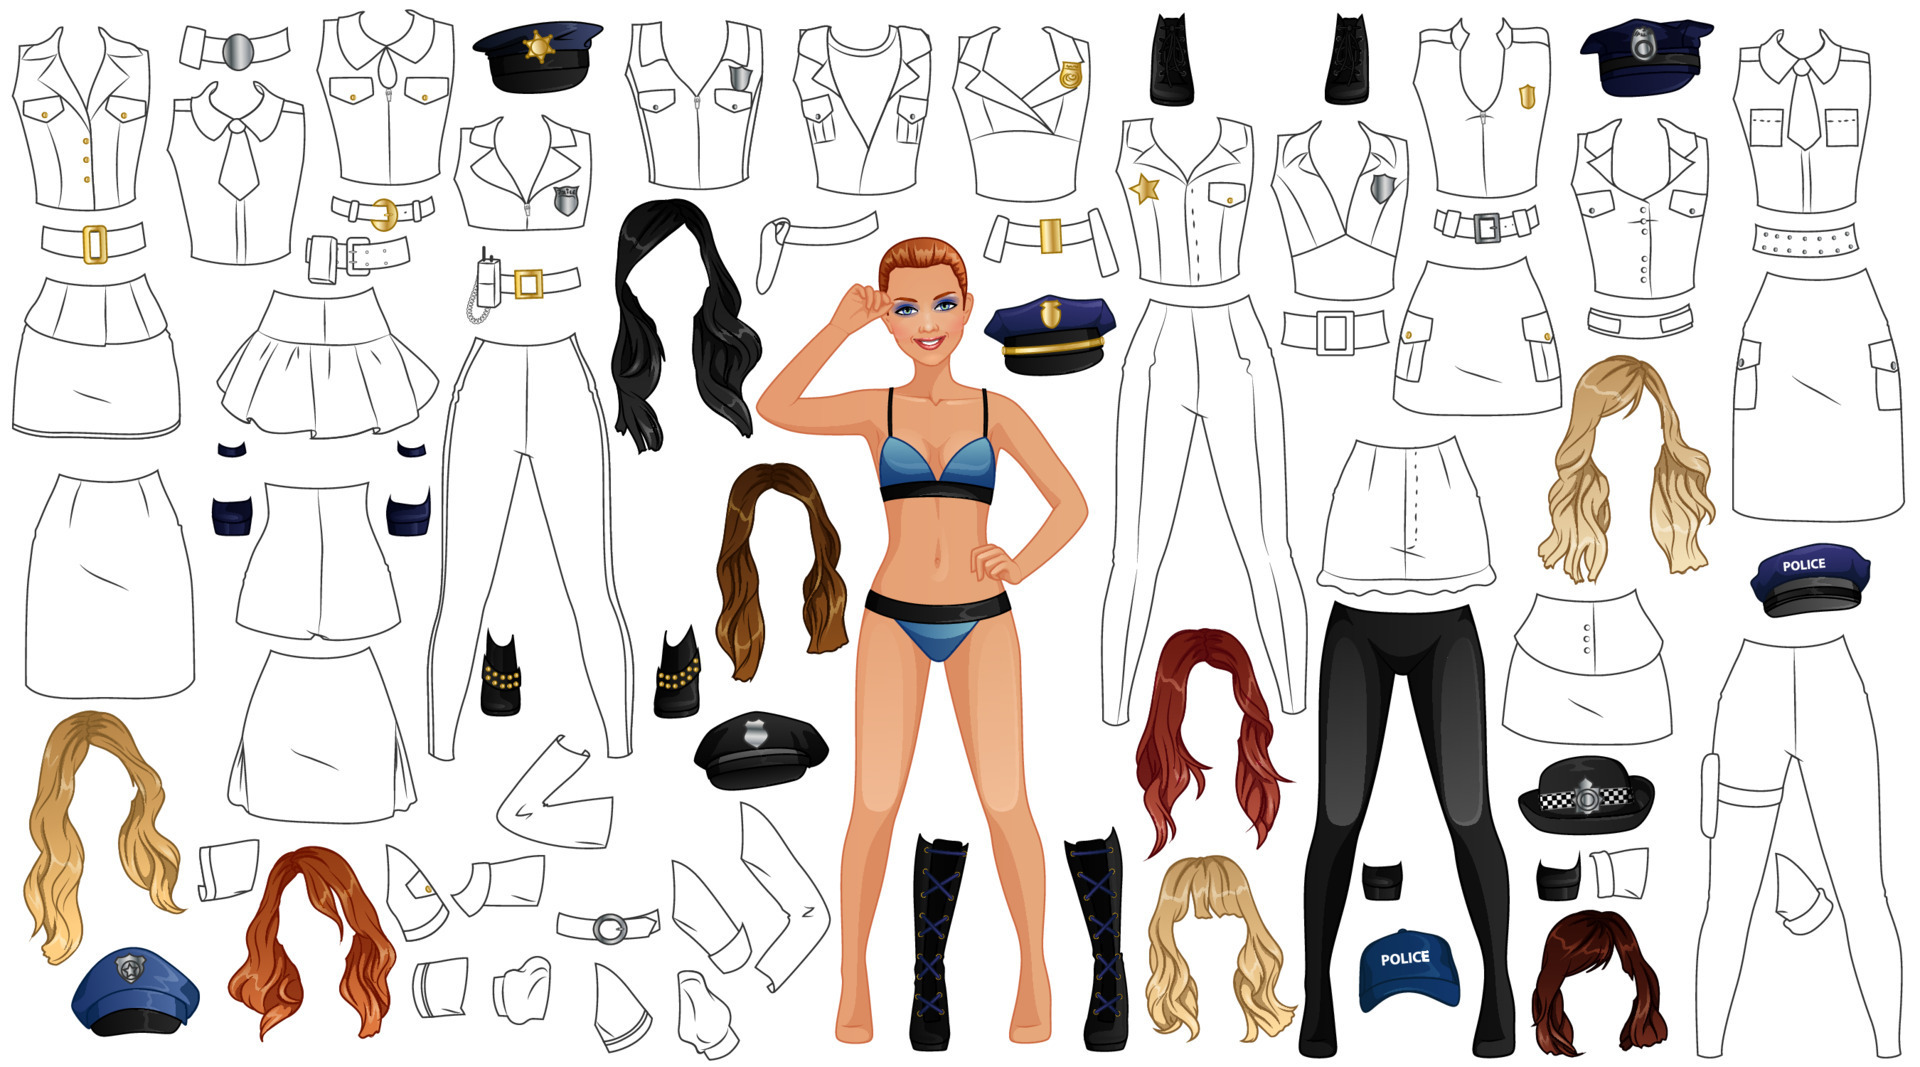 Police Uniform Coloring Page Paper Doll with Female Figure, Clothes,  Hairstyles and Accessories. Vector Illustration 22311706 Vector Art at  Vecteezy